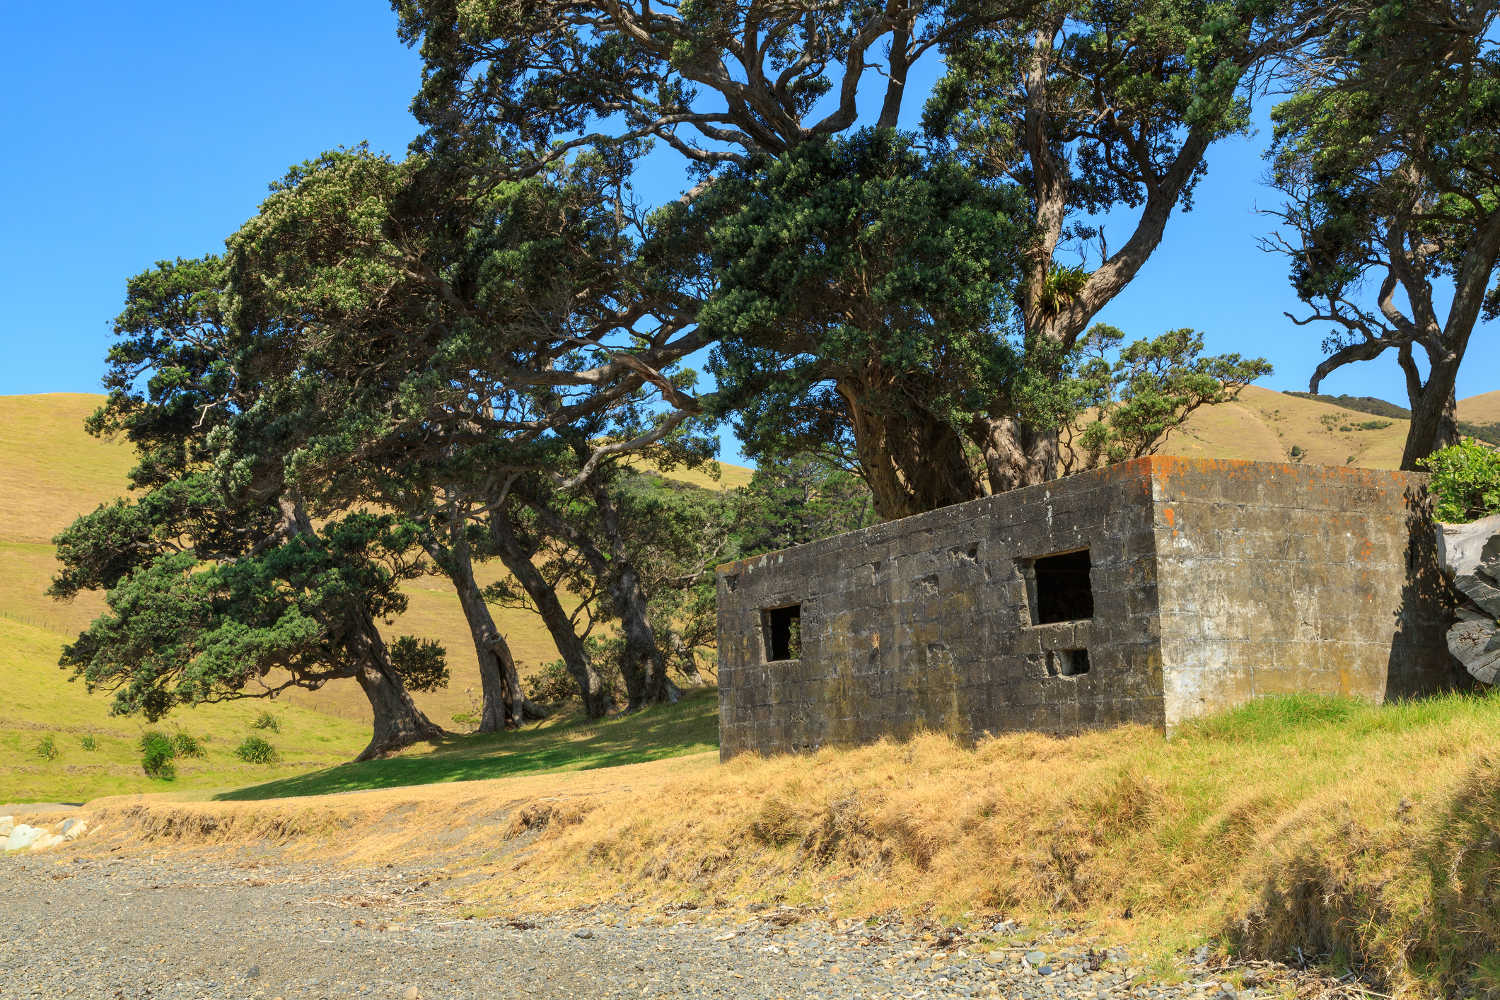 Pohutukawa trees tower over an old bunker at Fletcher Bay in the remote, secluded far north of the Coromandel Peninsula, New Zealand